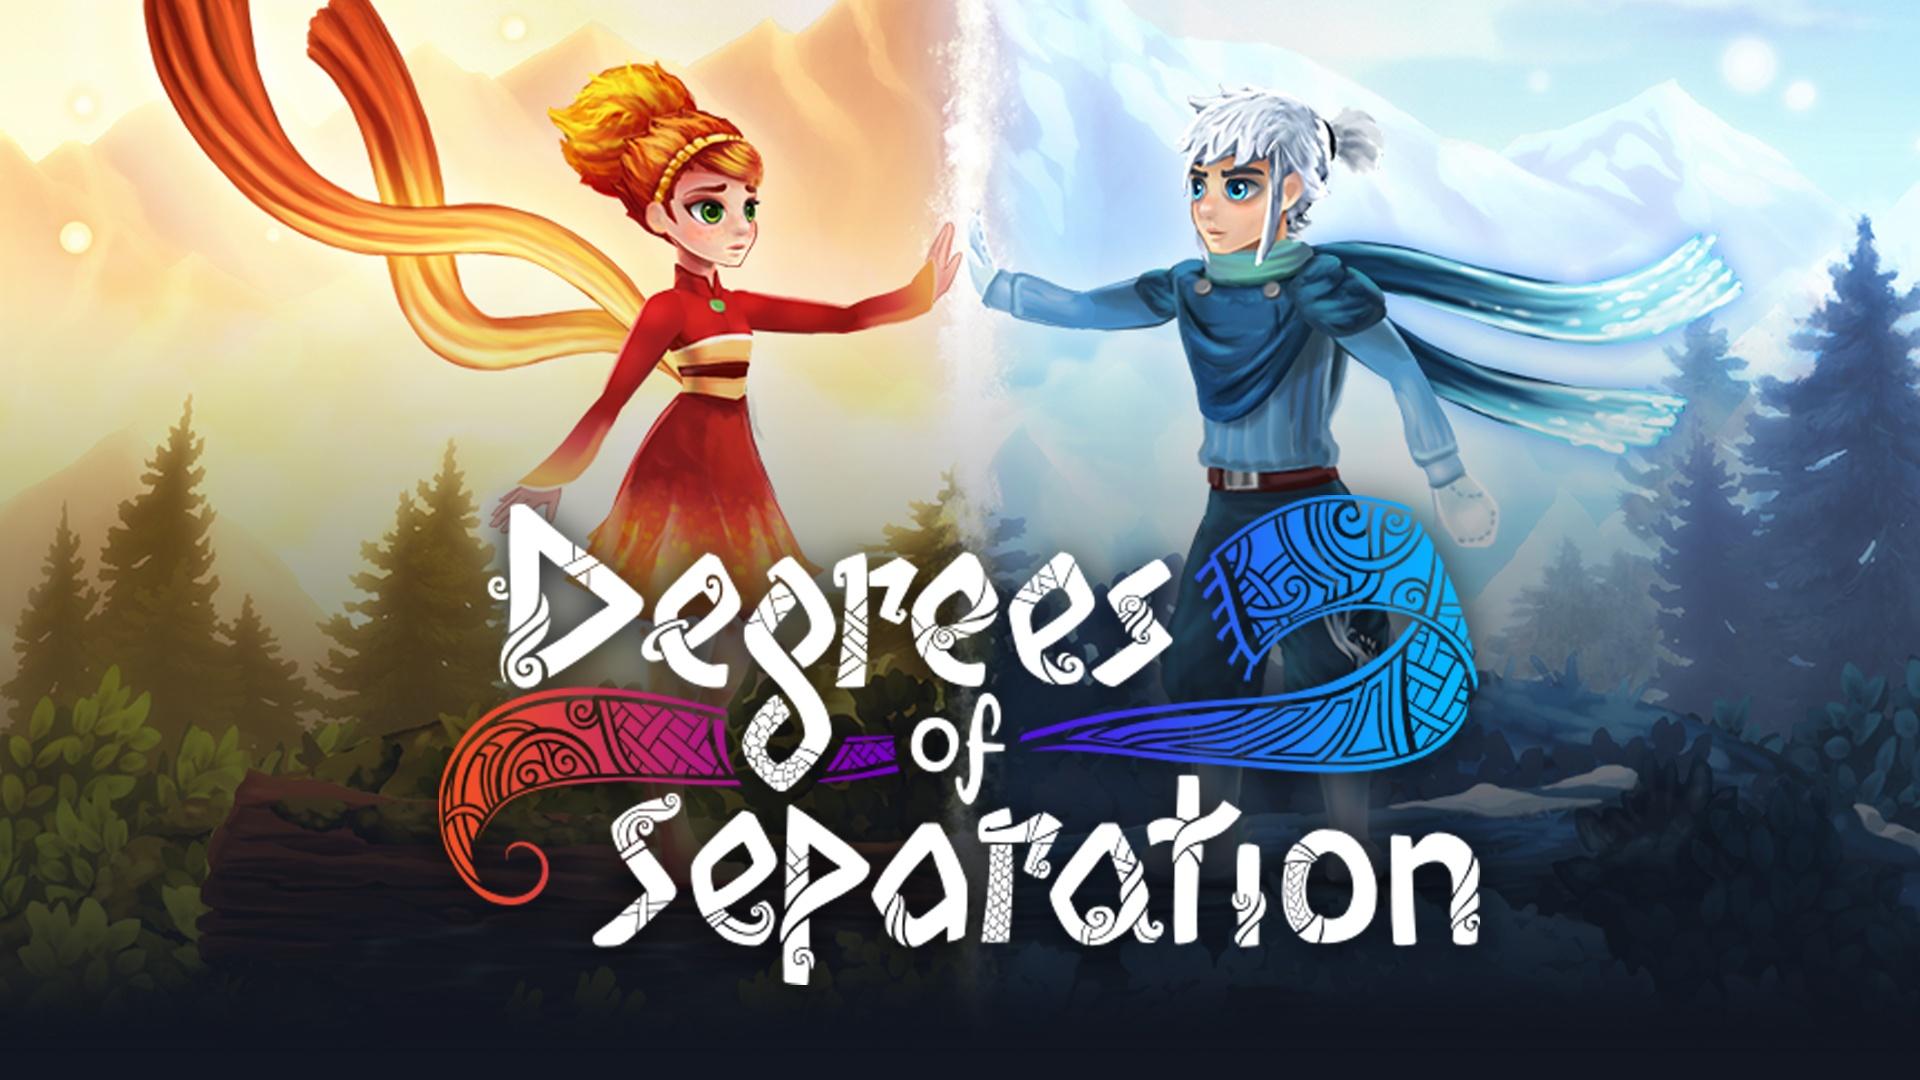 Degrees of Separation Nintendo Switch Download for $1.99